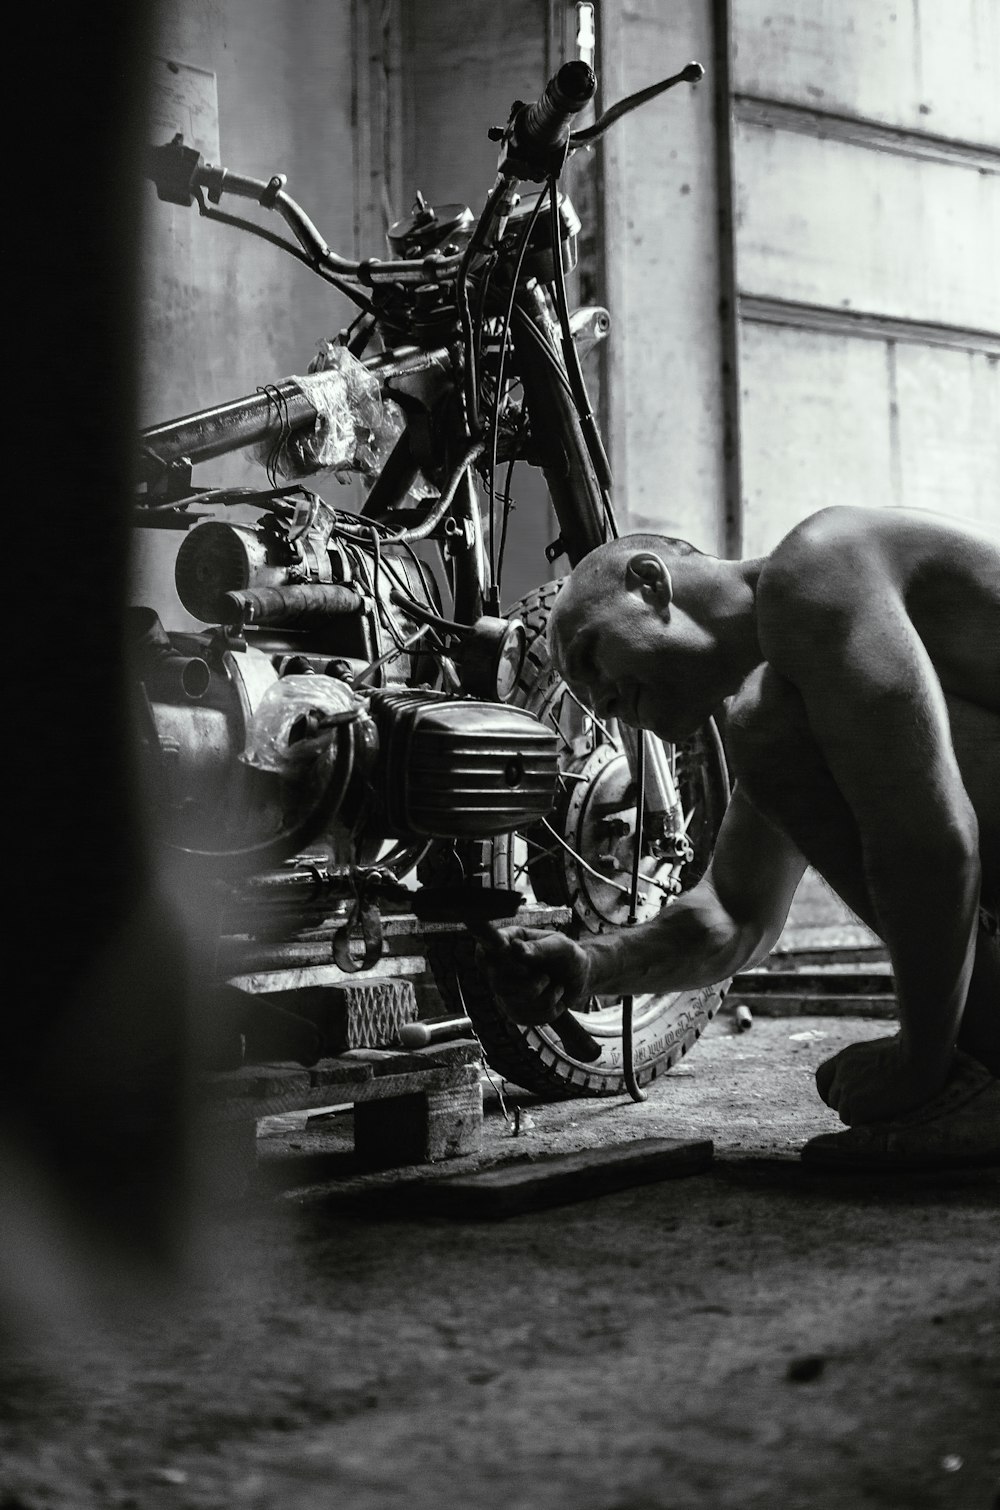 grayscale photography of man fixing motorcycle